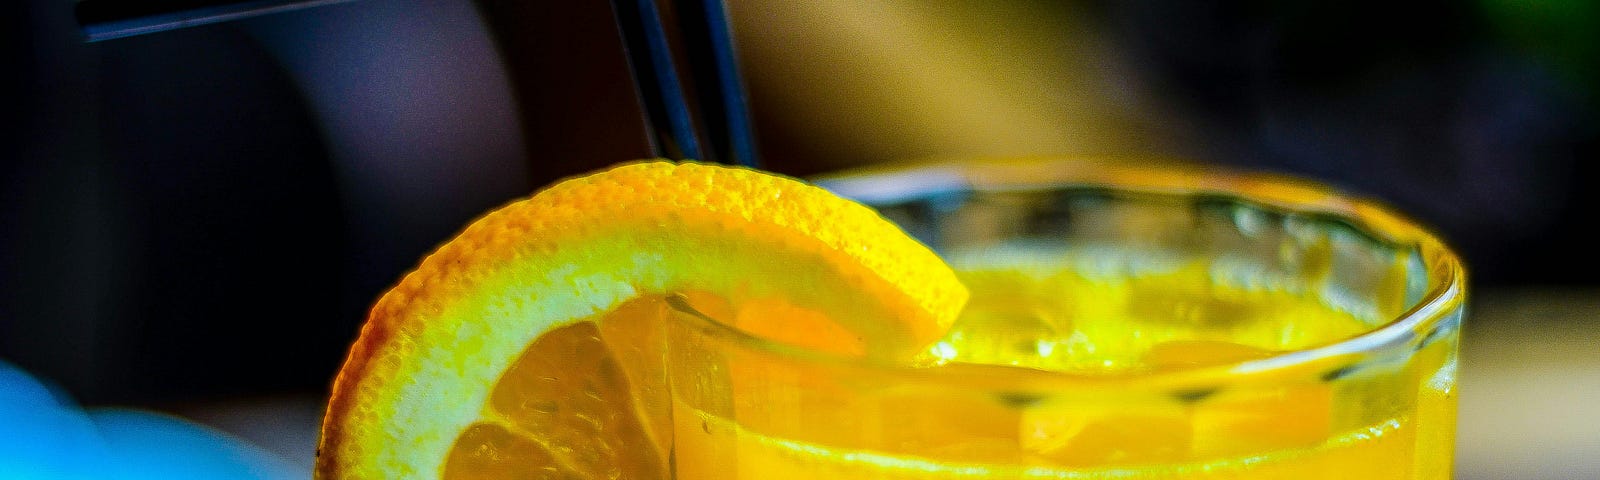 A glass of orange juice, with a slice of orange at its top.